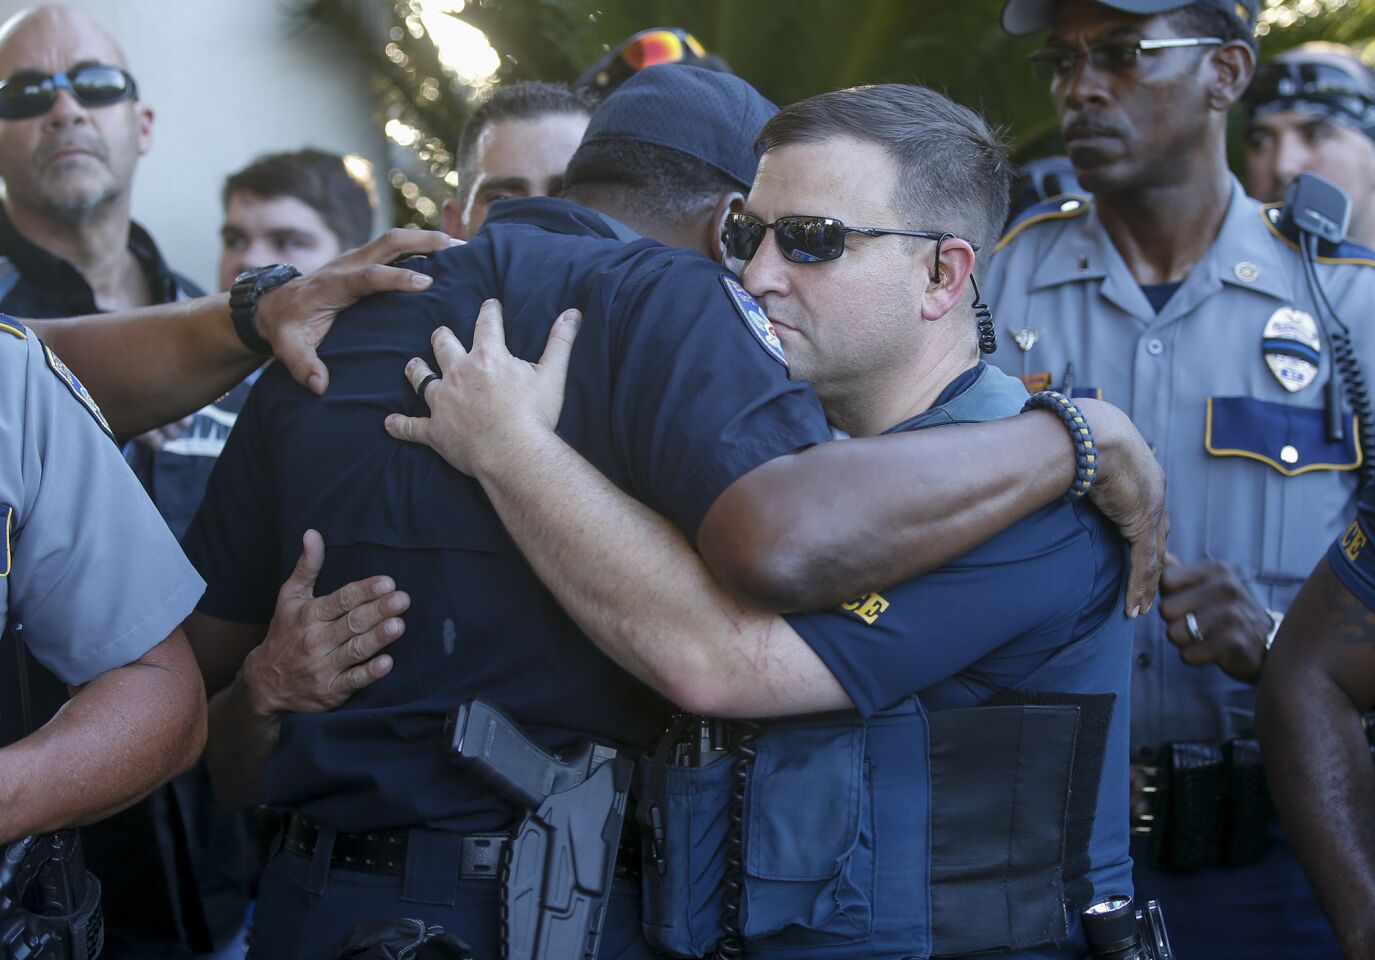 Baton Rouge Police Officers hug each other during a rally with nearly 400 motorcycle riders from various local clubs who rode to police headquarters to show thier support.